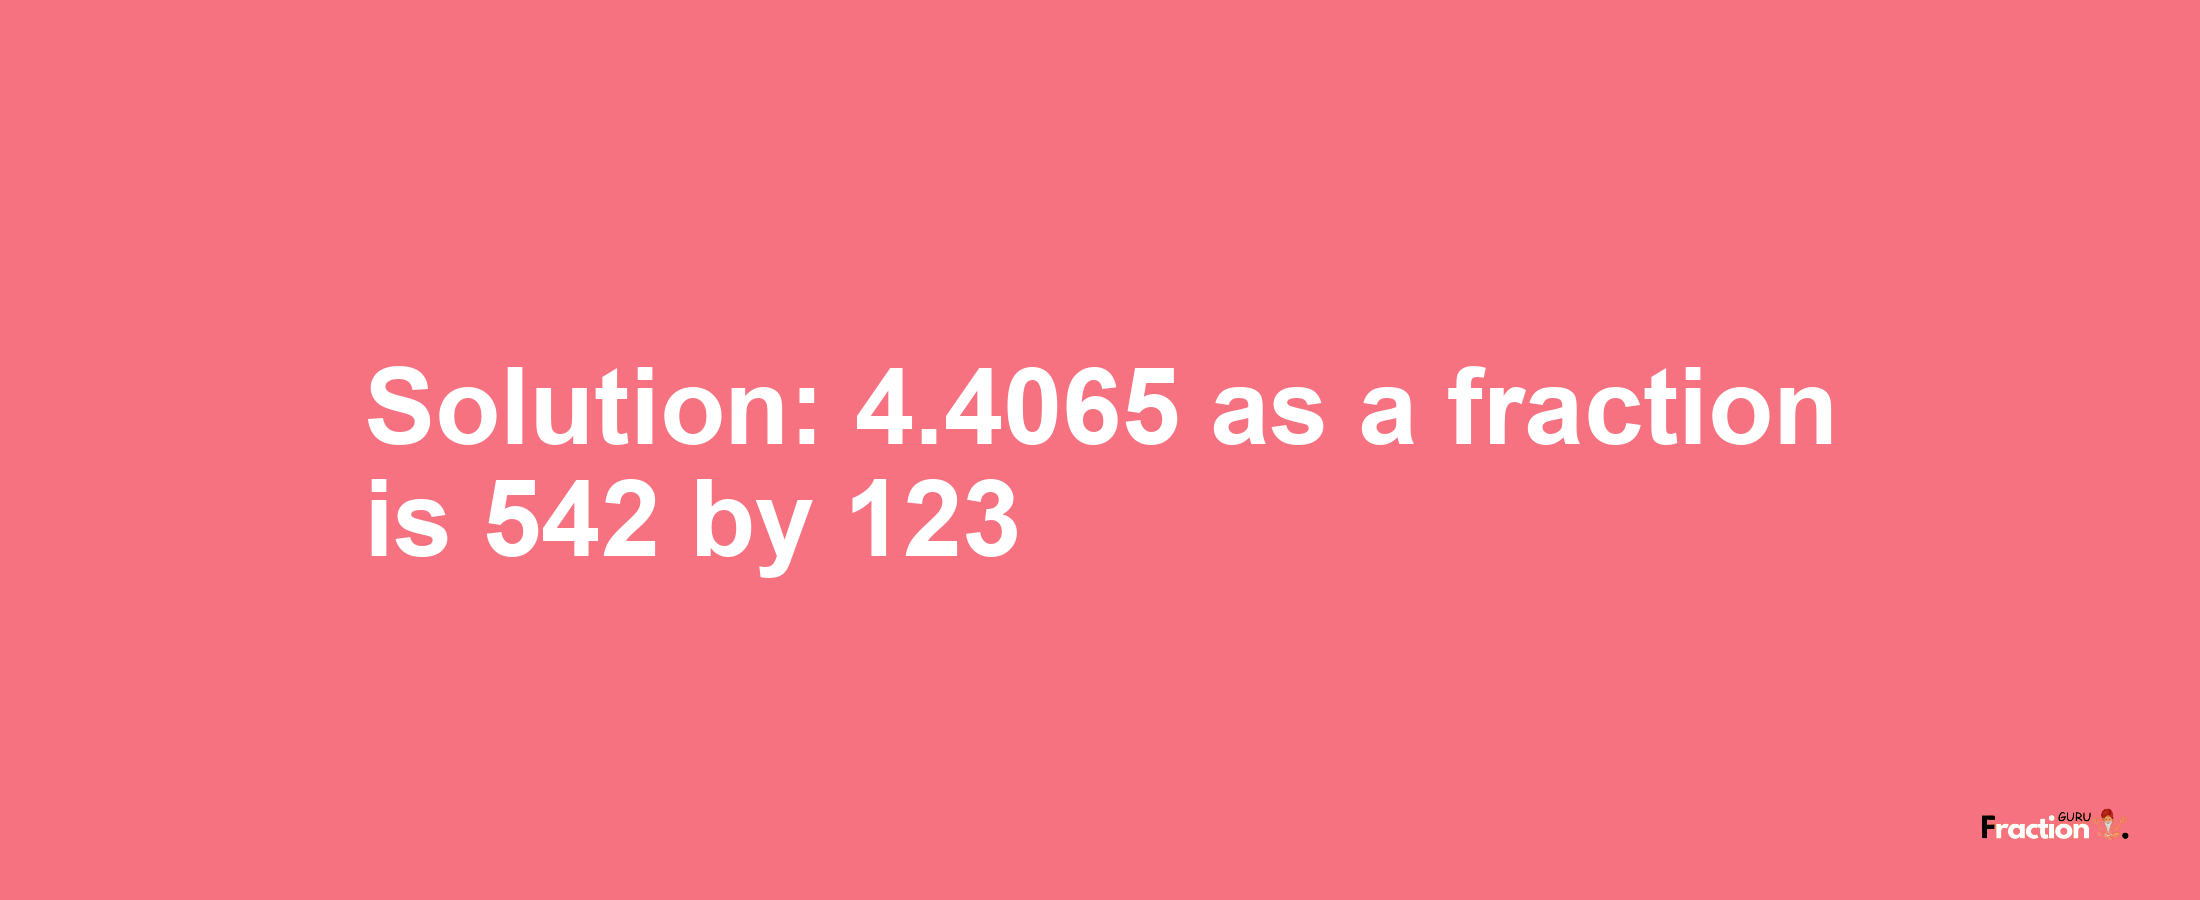 Solution:4.4065 as a fraction is 542/123